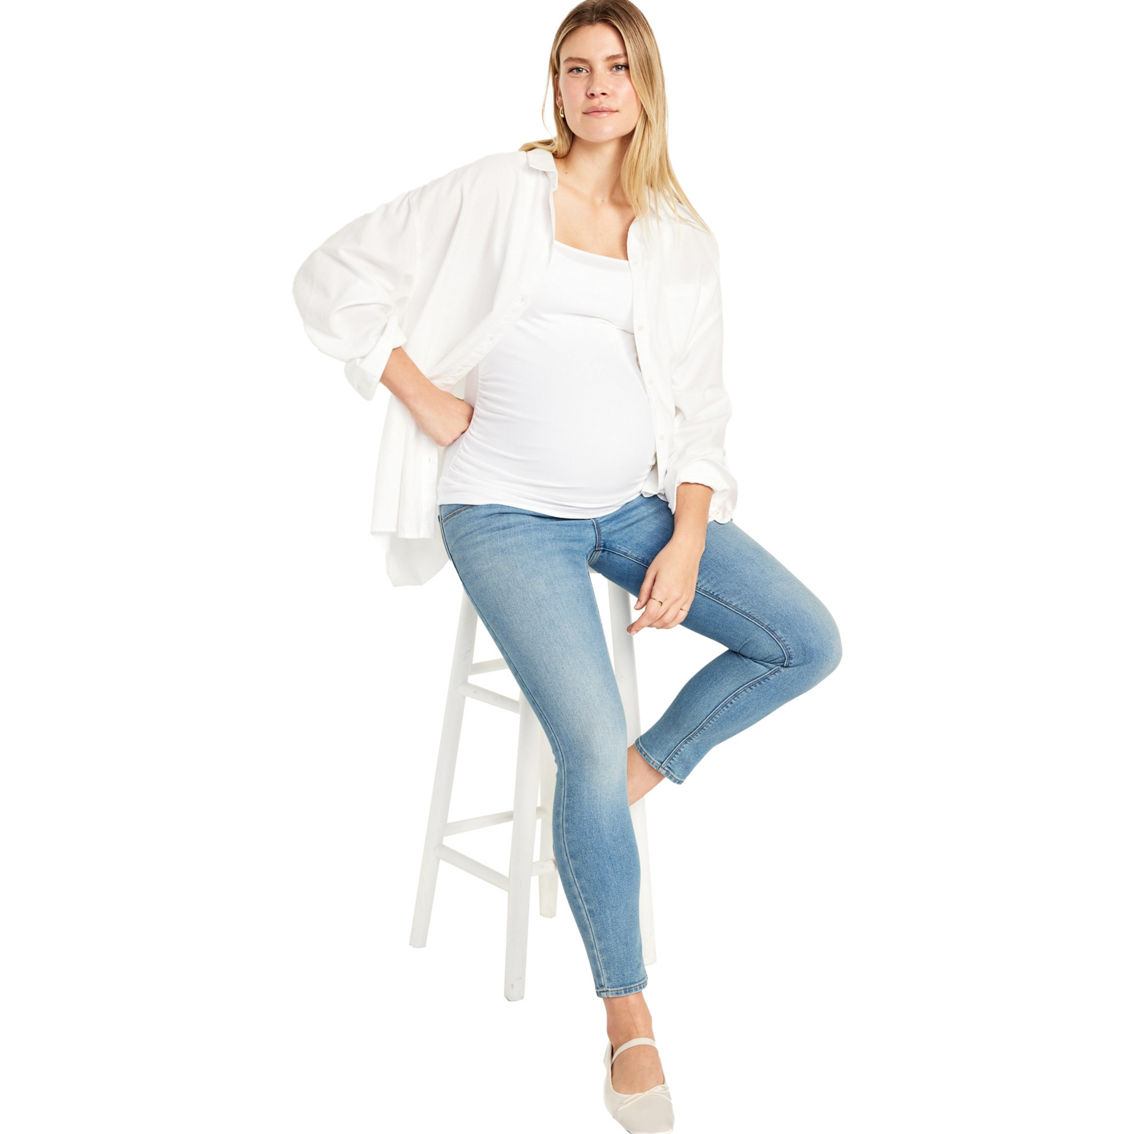 Old Navy Maternity Full-Panel Wow Light Wash Skinny Jeans - Image 3 of 4